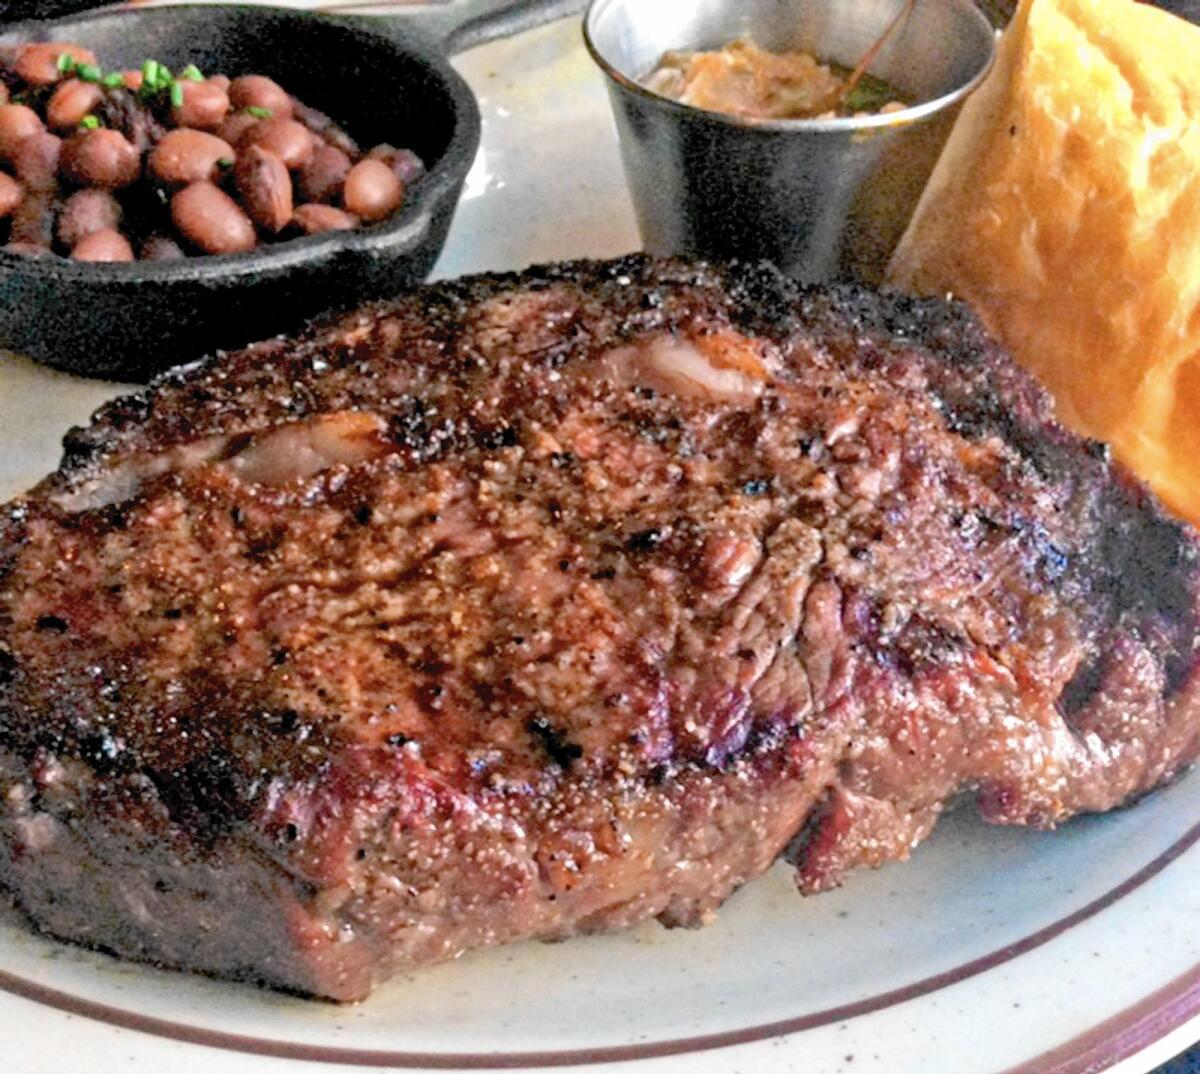 Spencer steak at the SeaSalt Woodfire Grill in Huntington Beach.